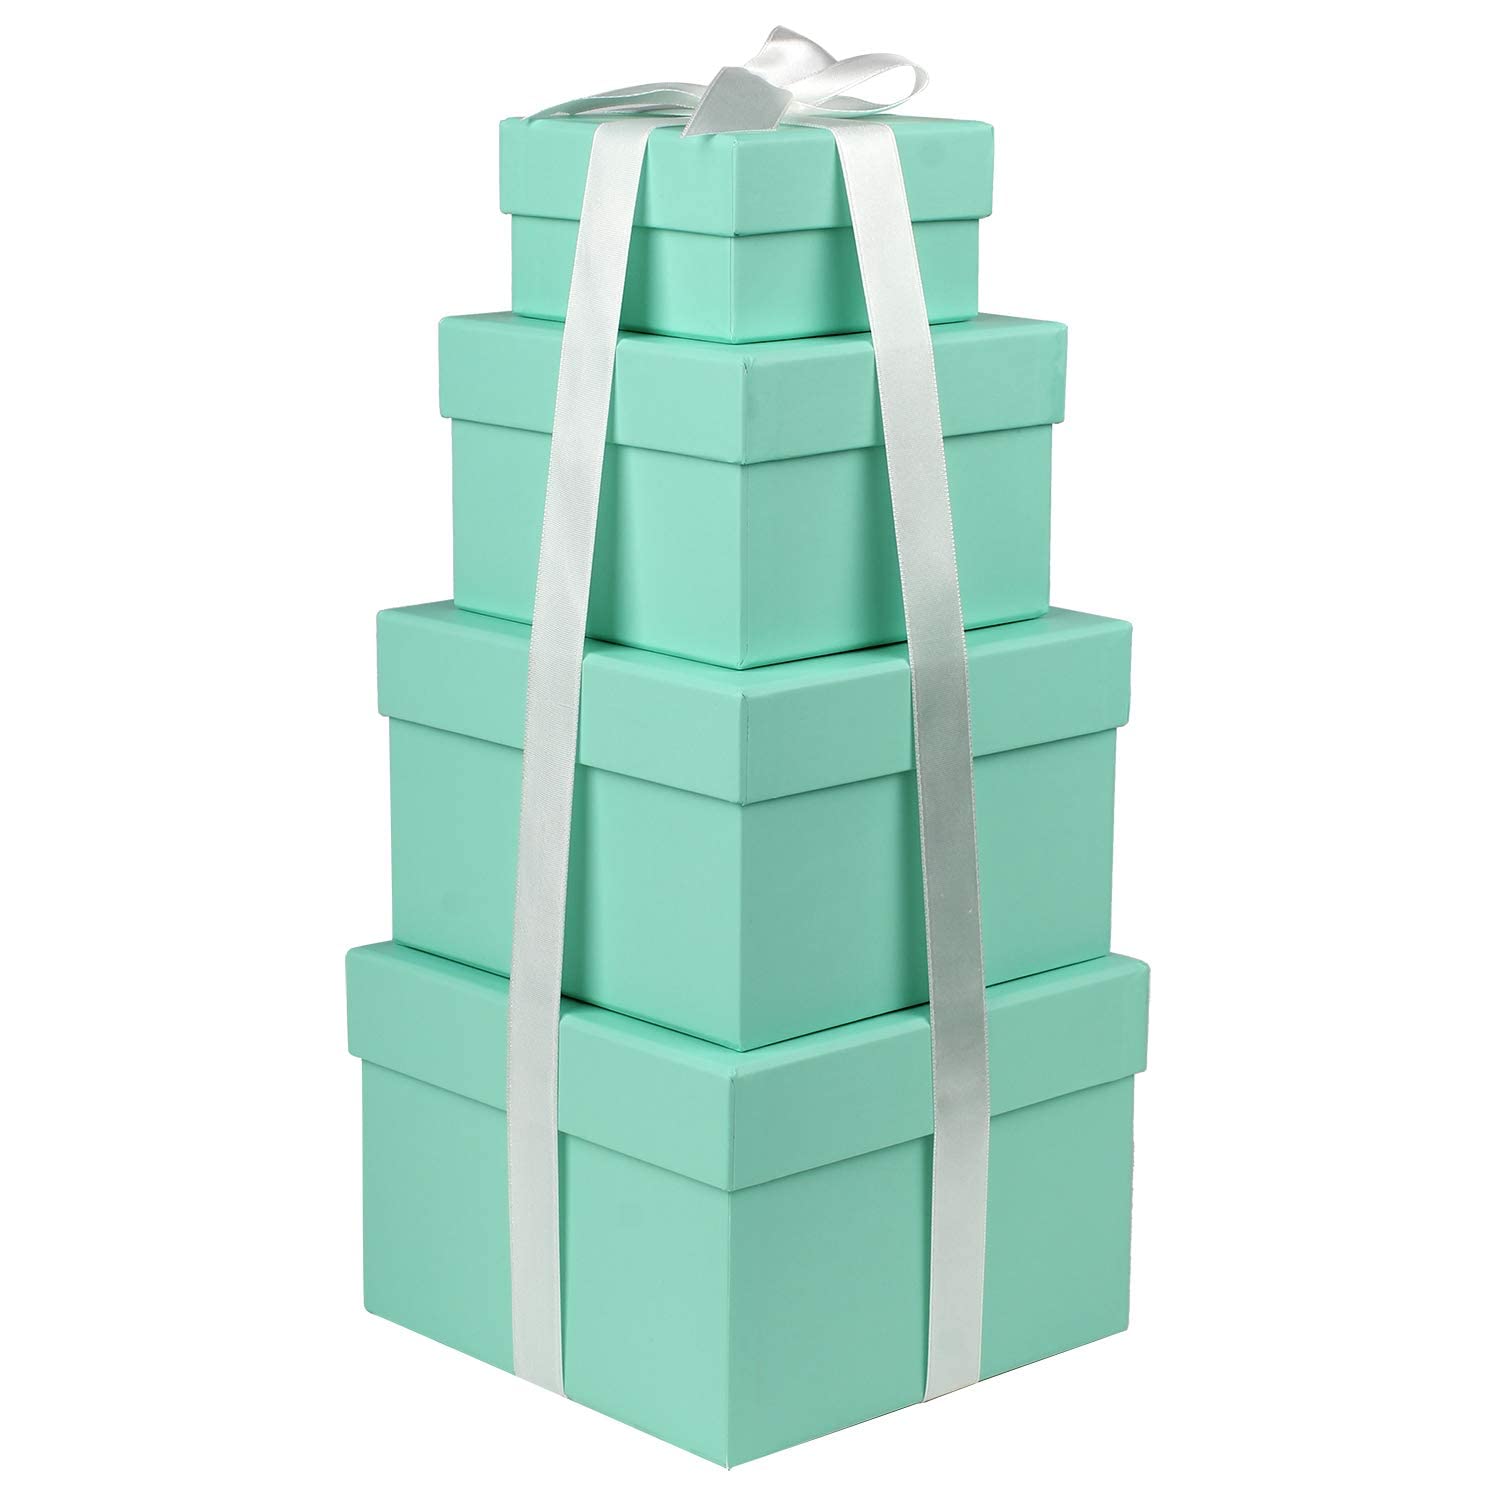 Briful Square Gift Boxes with Lids Set of 4 Teal Green Gift Box